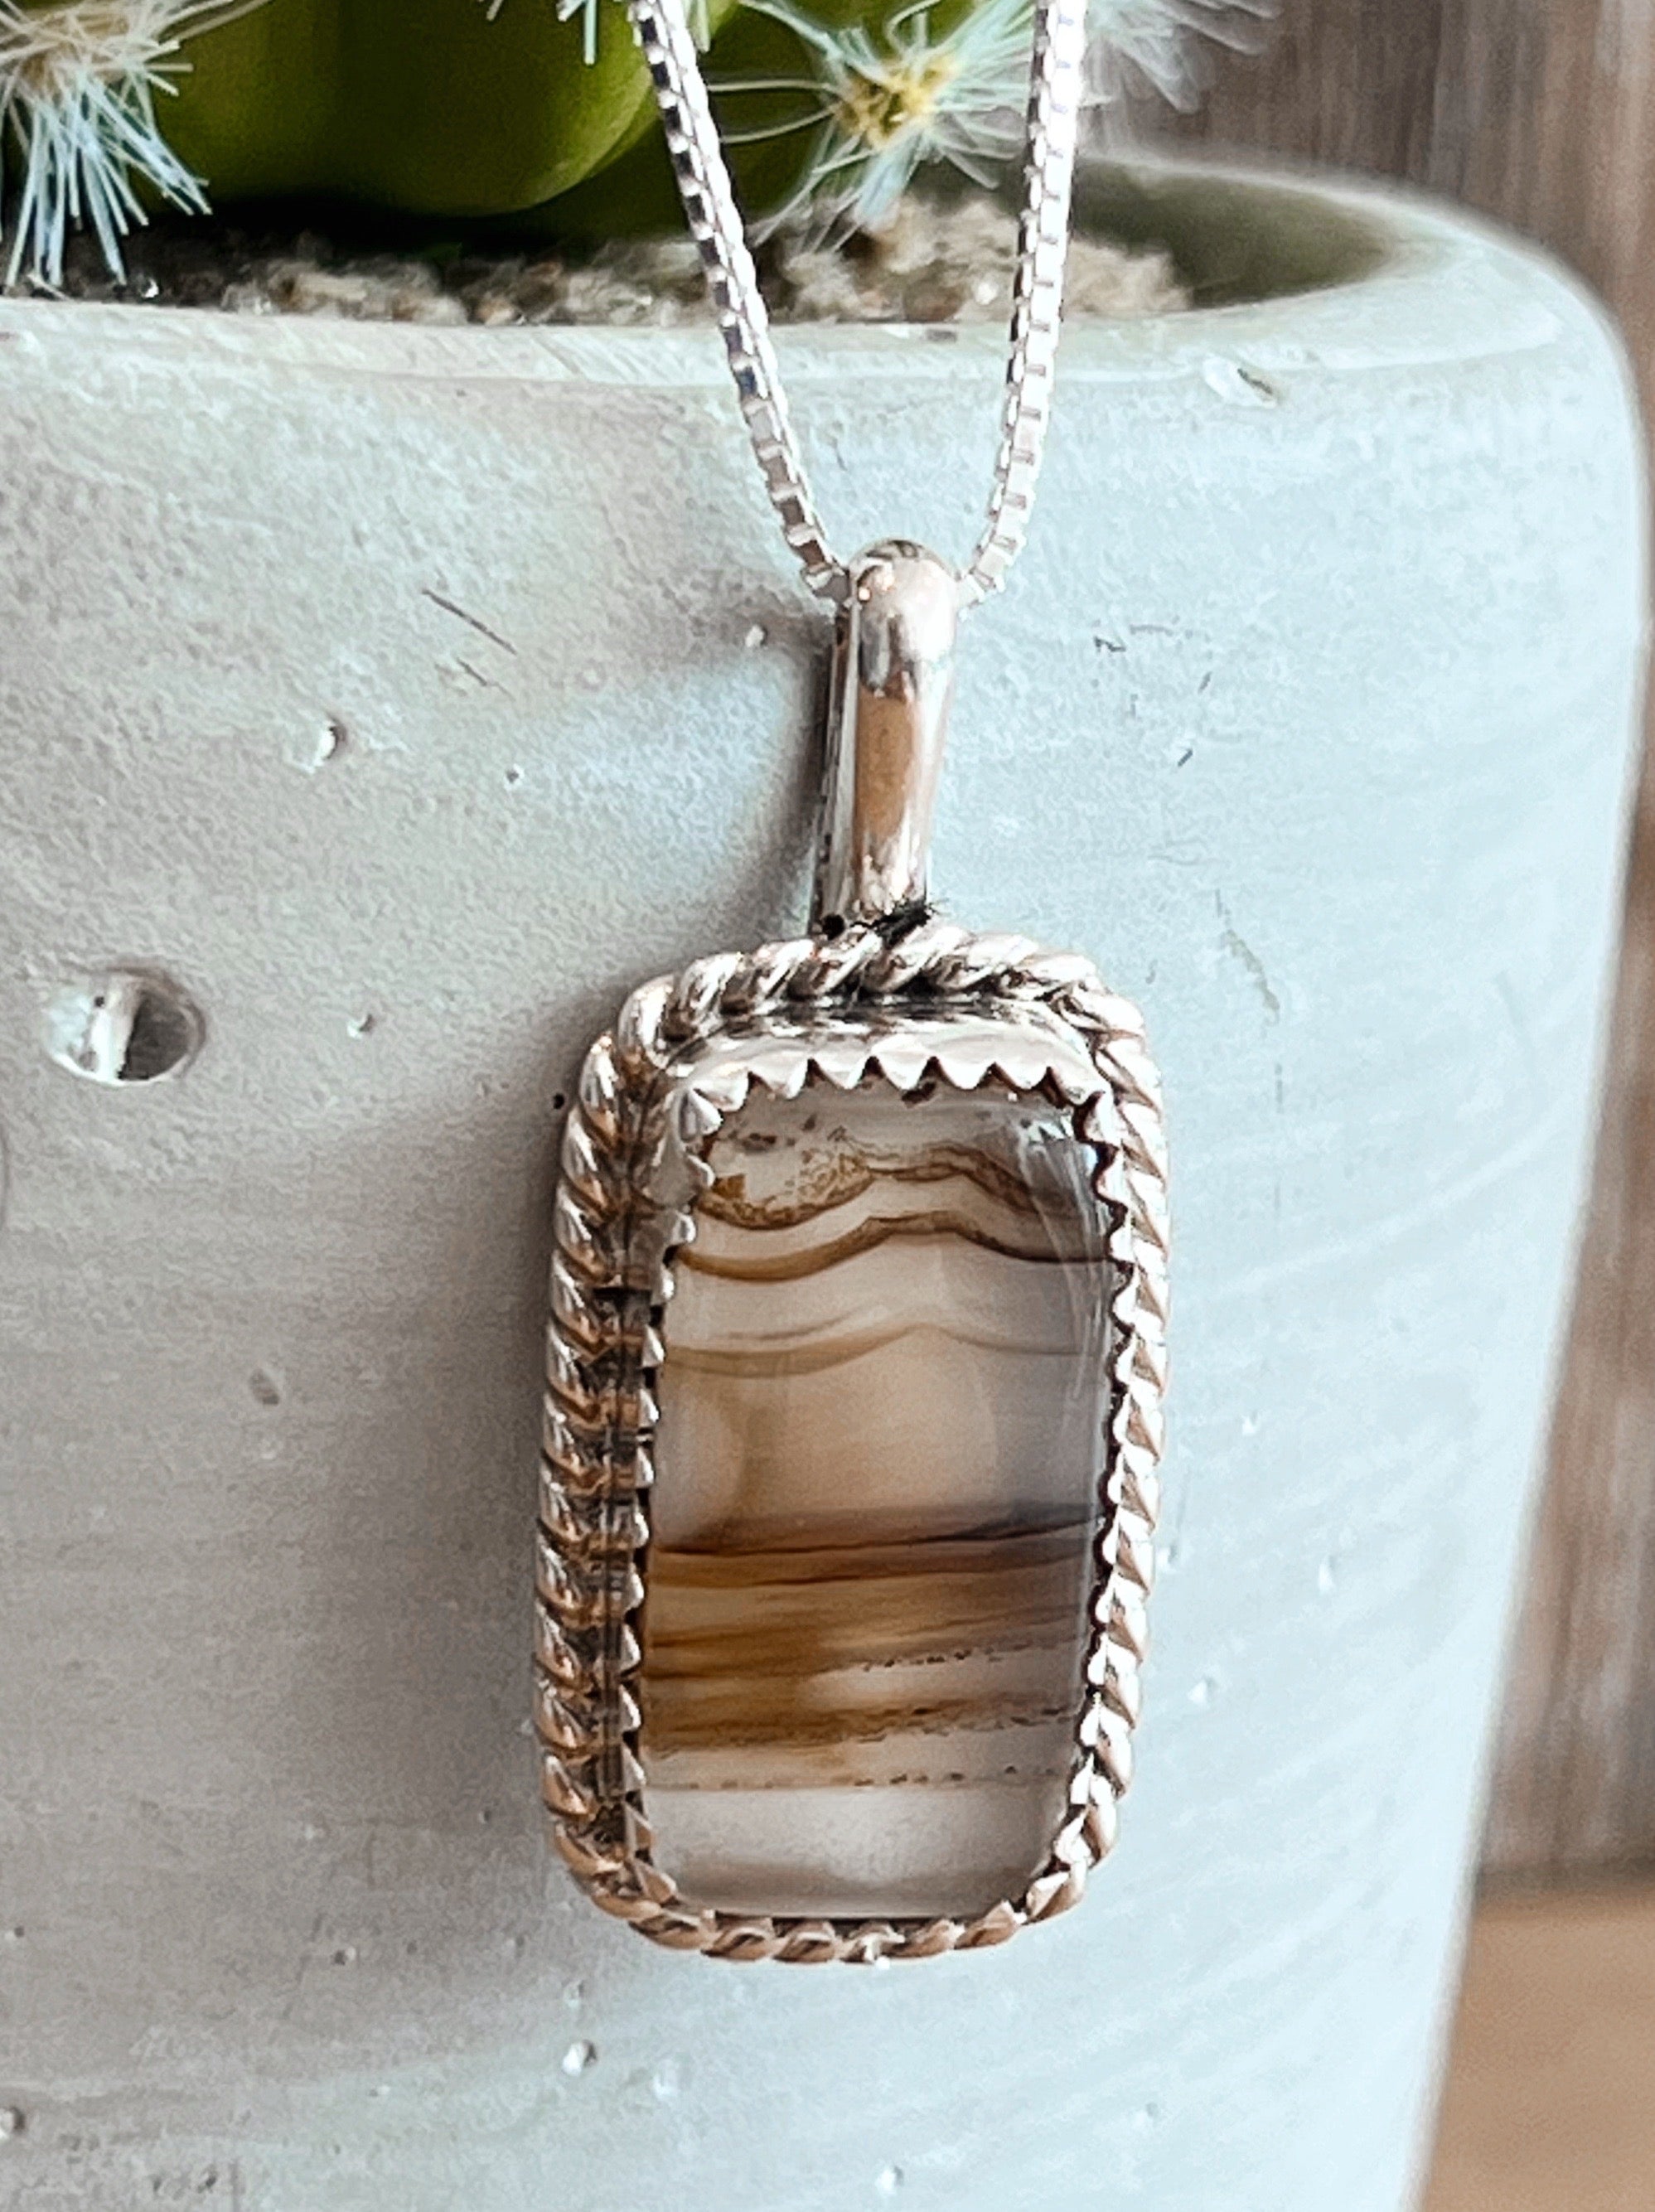 Montana Agate Sterling Silver Necklace